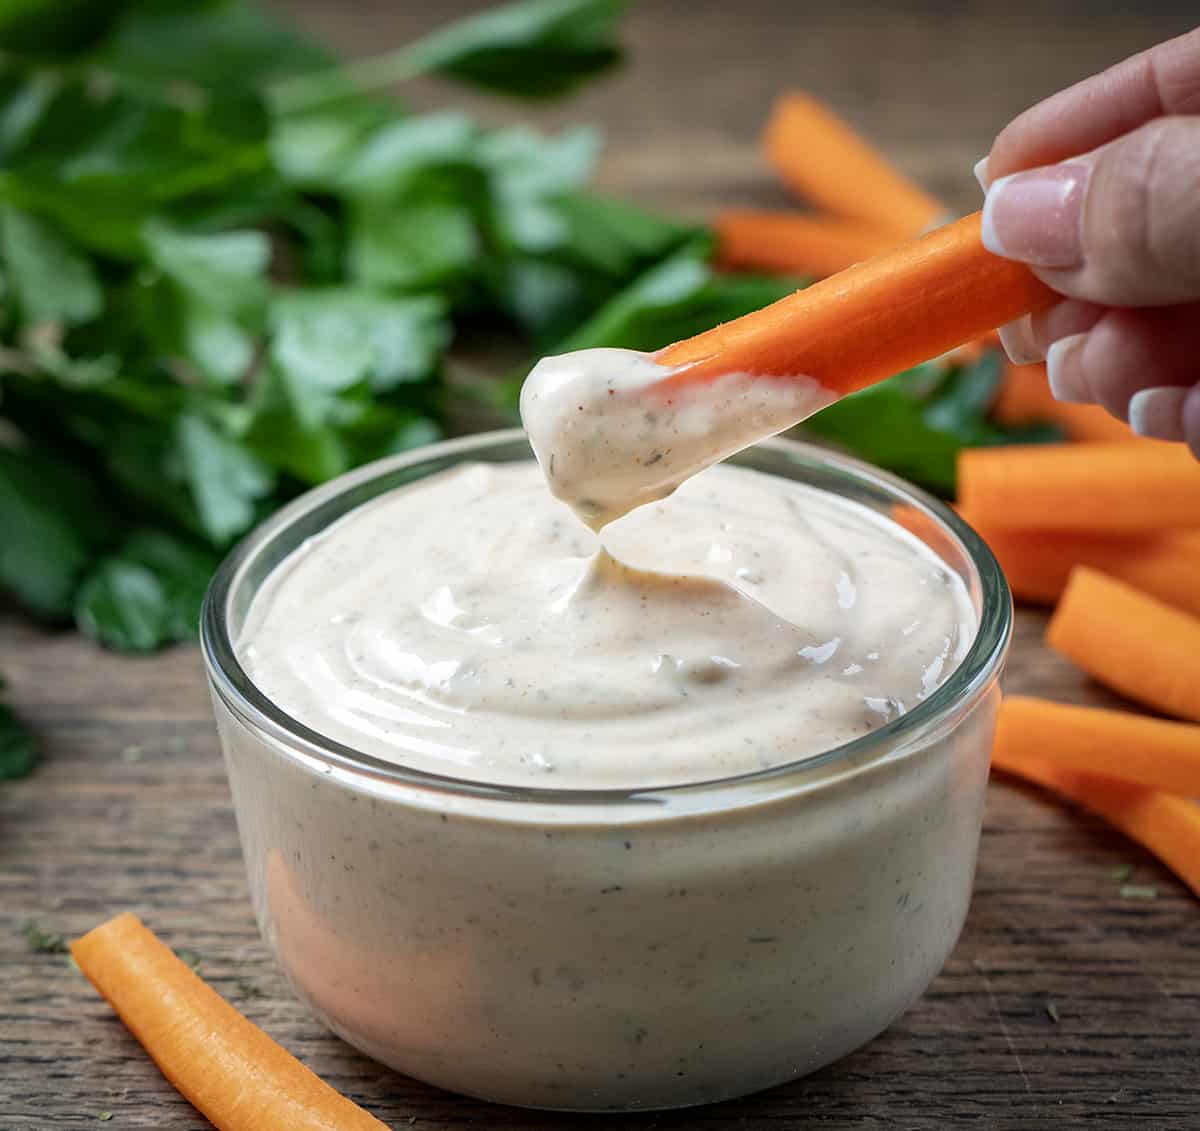 Dipping Carrot into a Bowl of Cowboy Ranch Dressing.